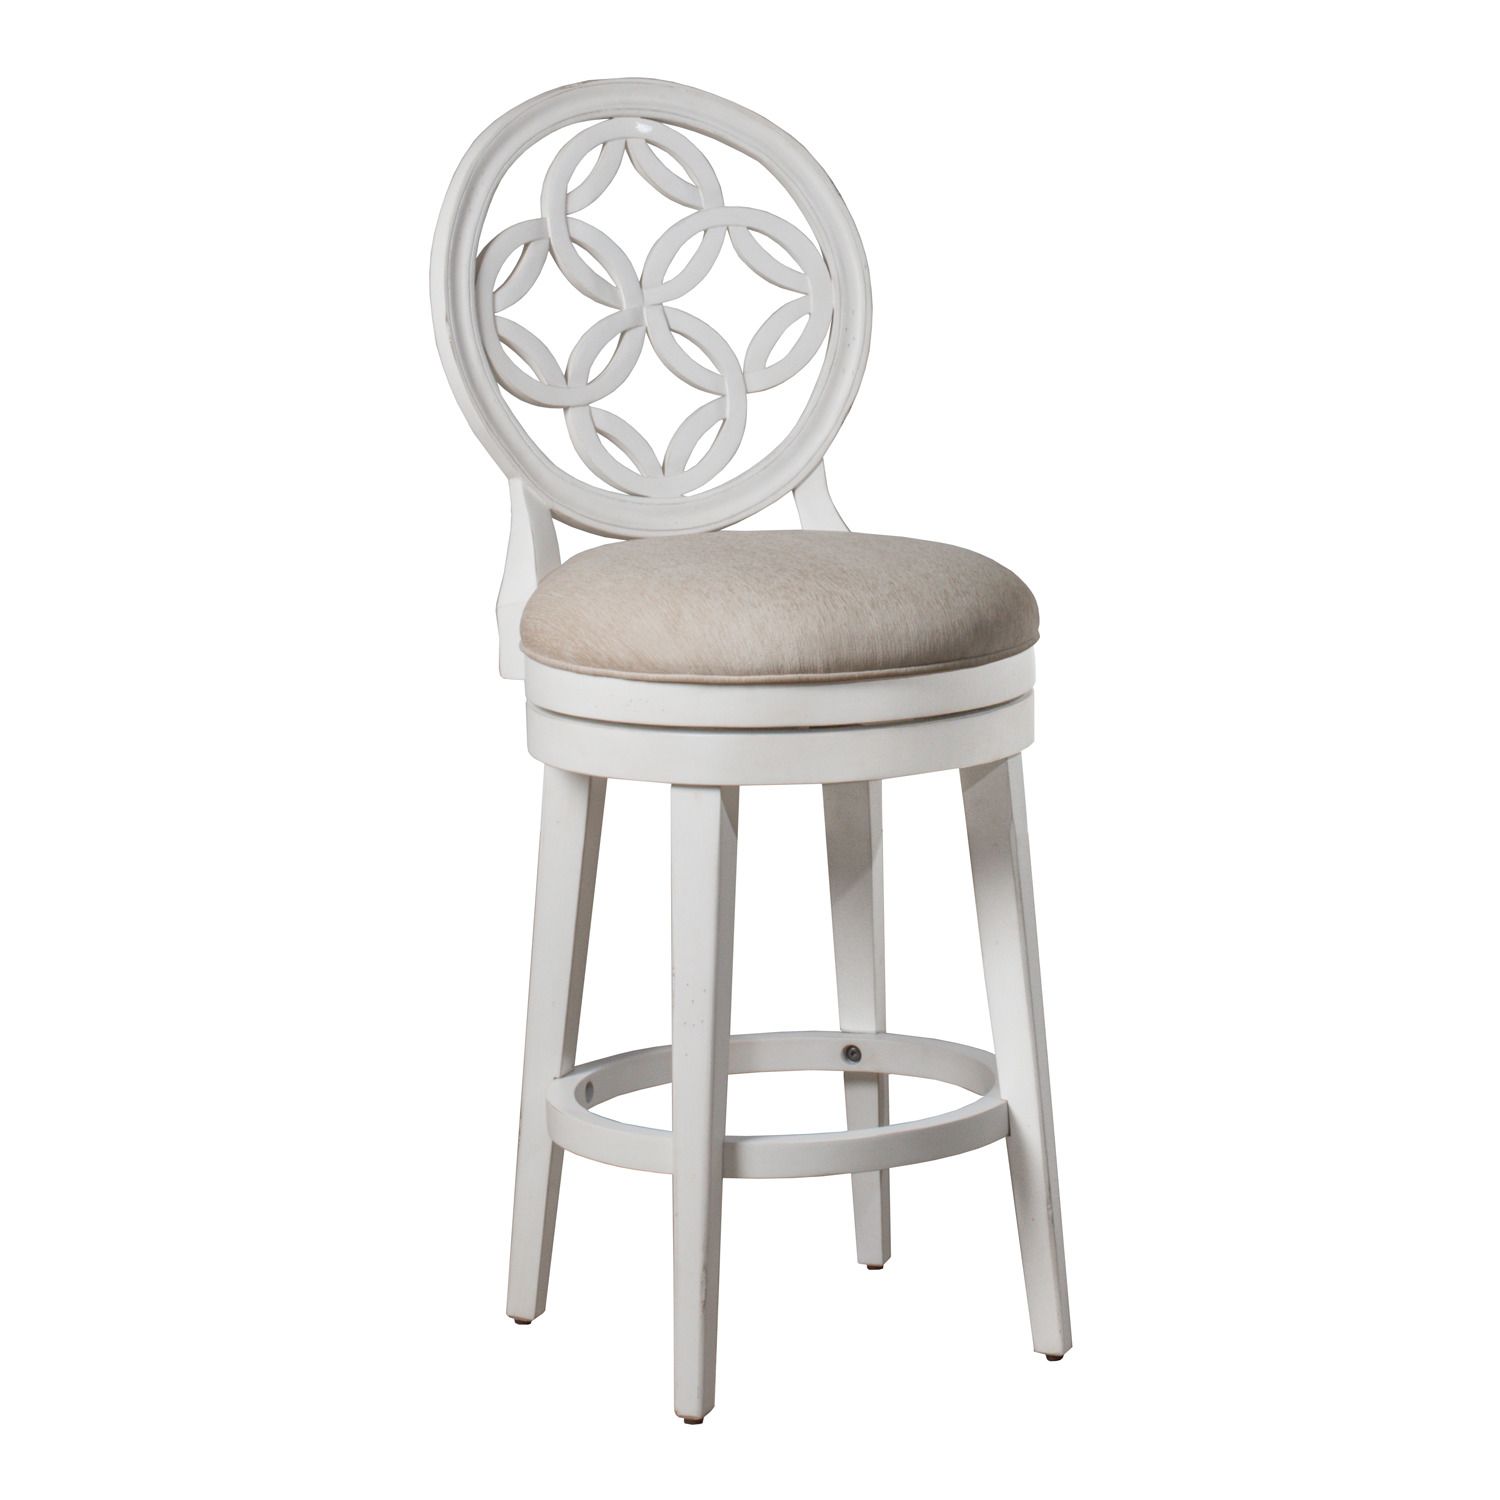 Image for Hillsdale Furniture Savona Swivel Counter Stool at Kohl's.